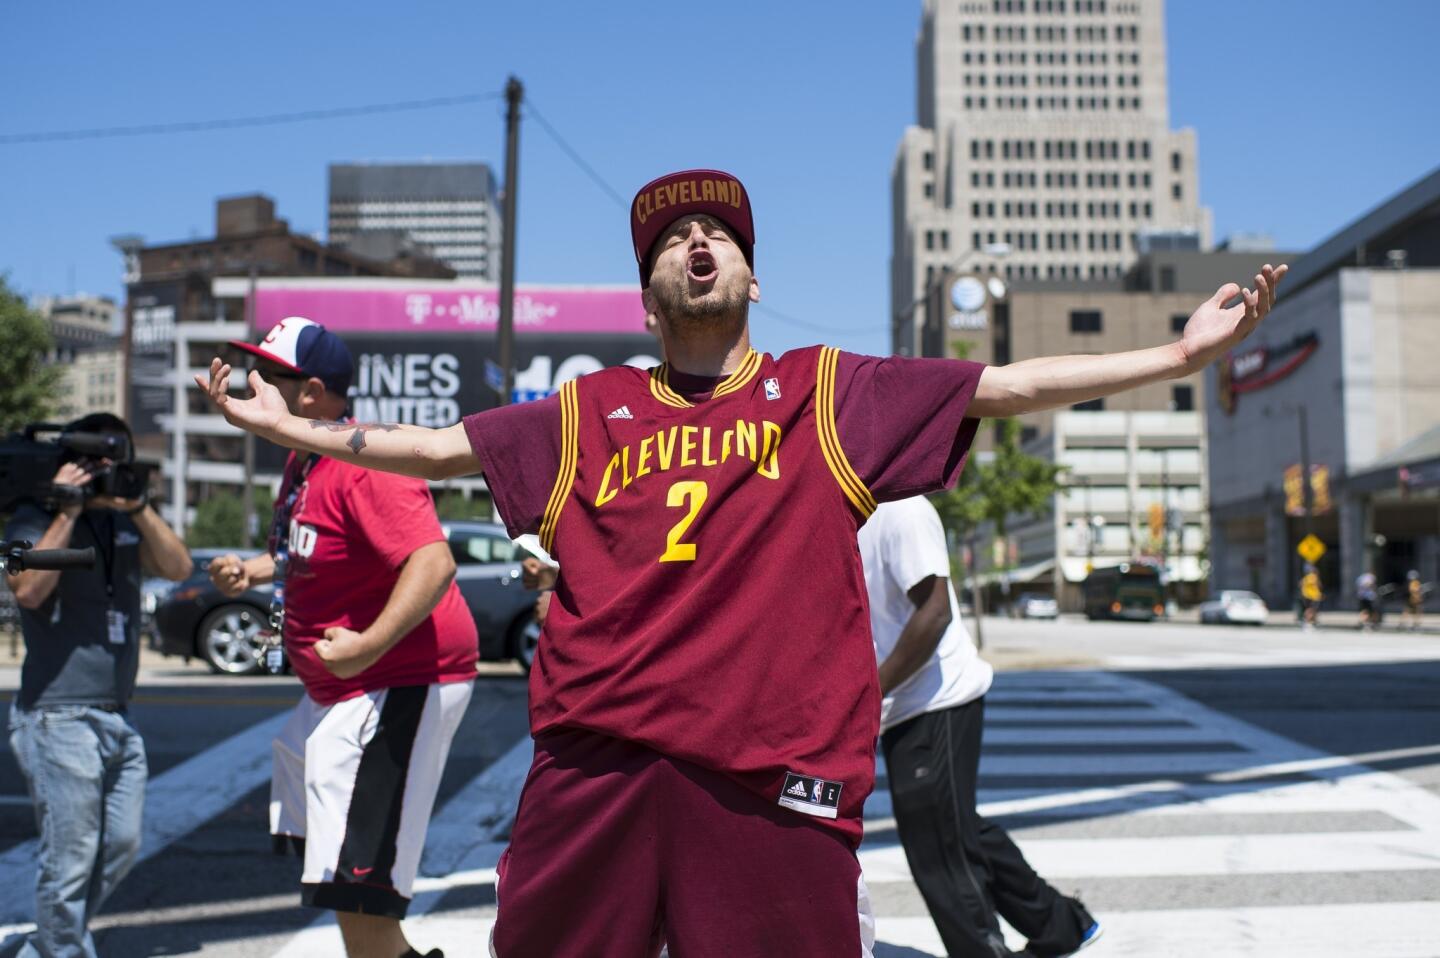 A Cavaliers fan reacts to the news of LeBron James' return in Cleveland, Ohio